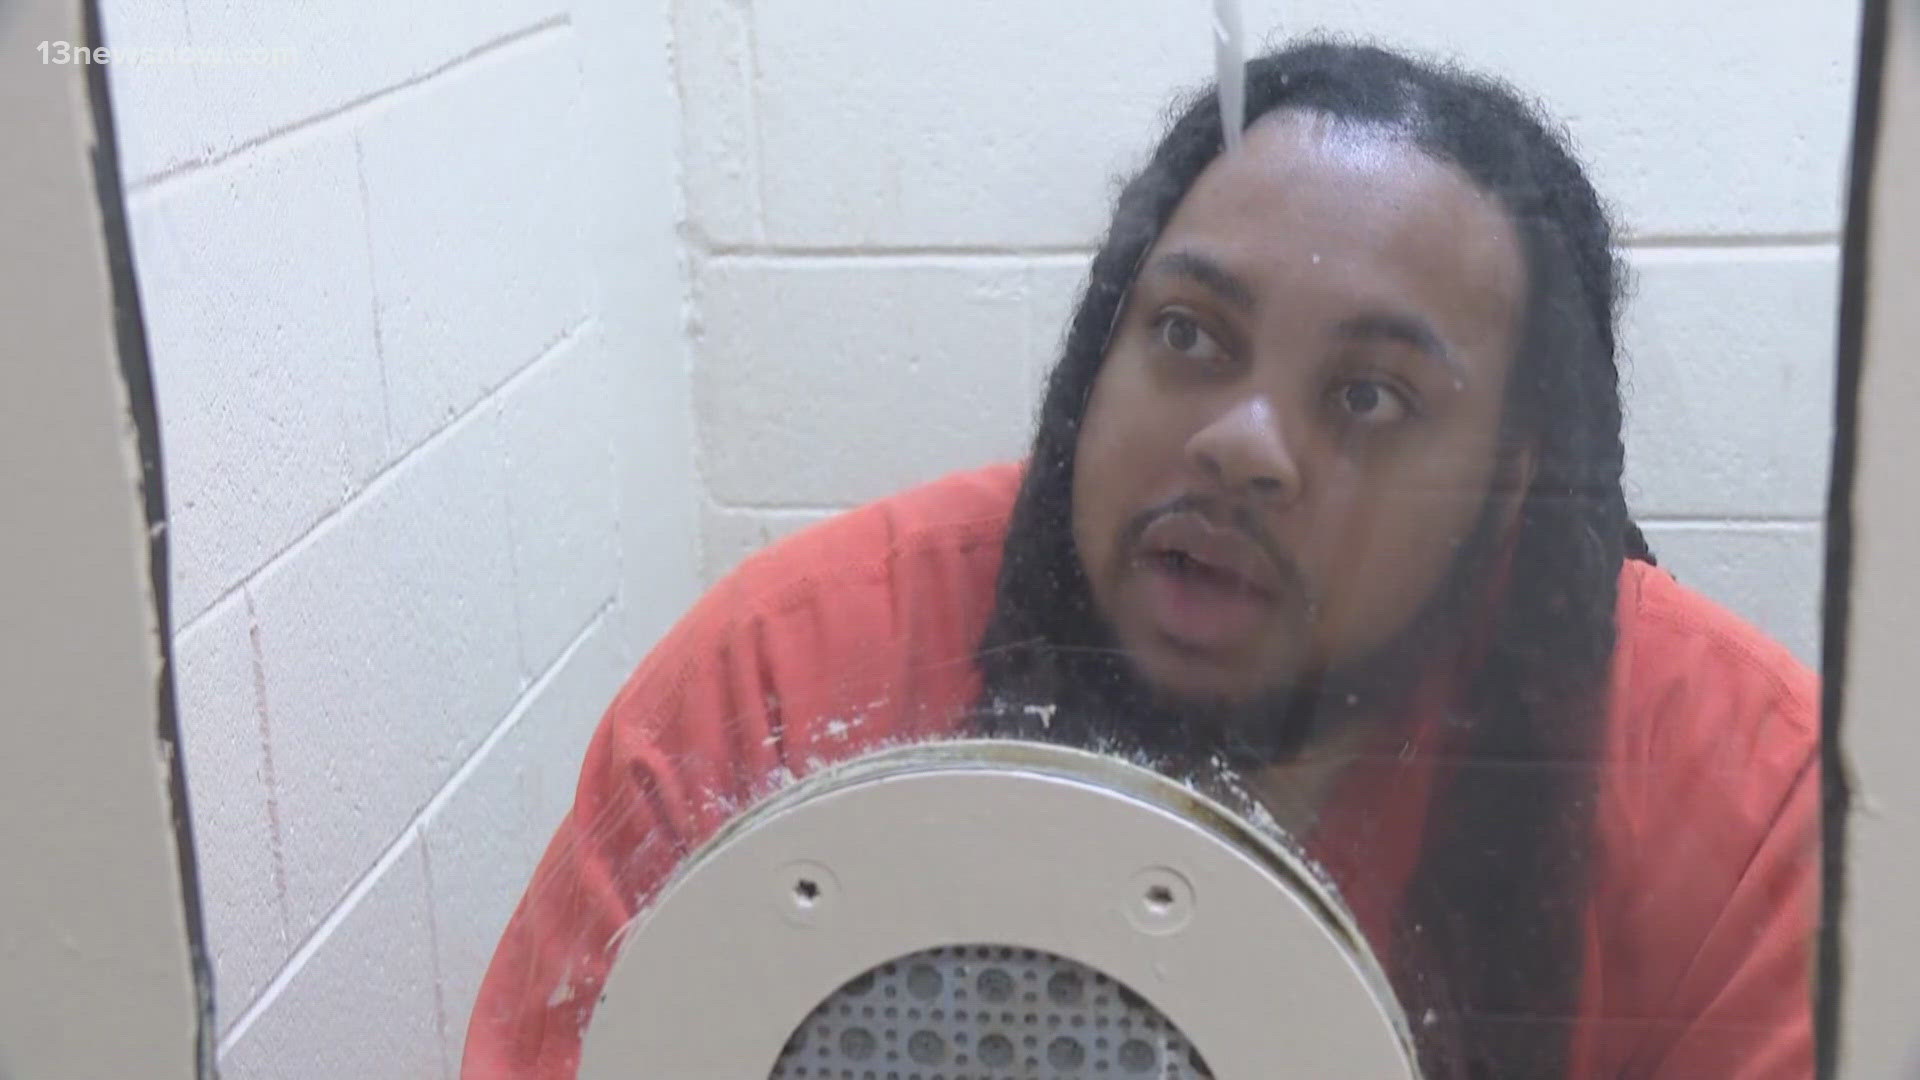 Later this morning, we'll learn how long Cola Beale could spend behind bars. A Virginia Beach judge will hand down his sentence for the murders of two people.